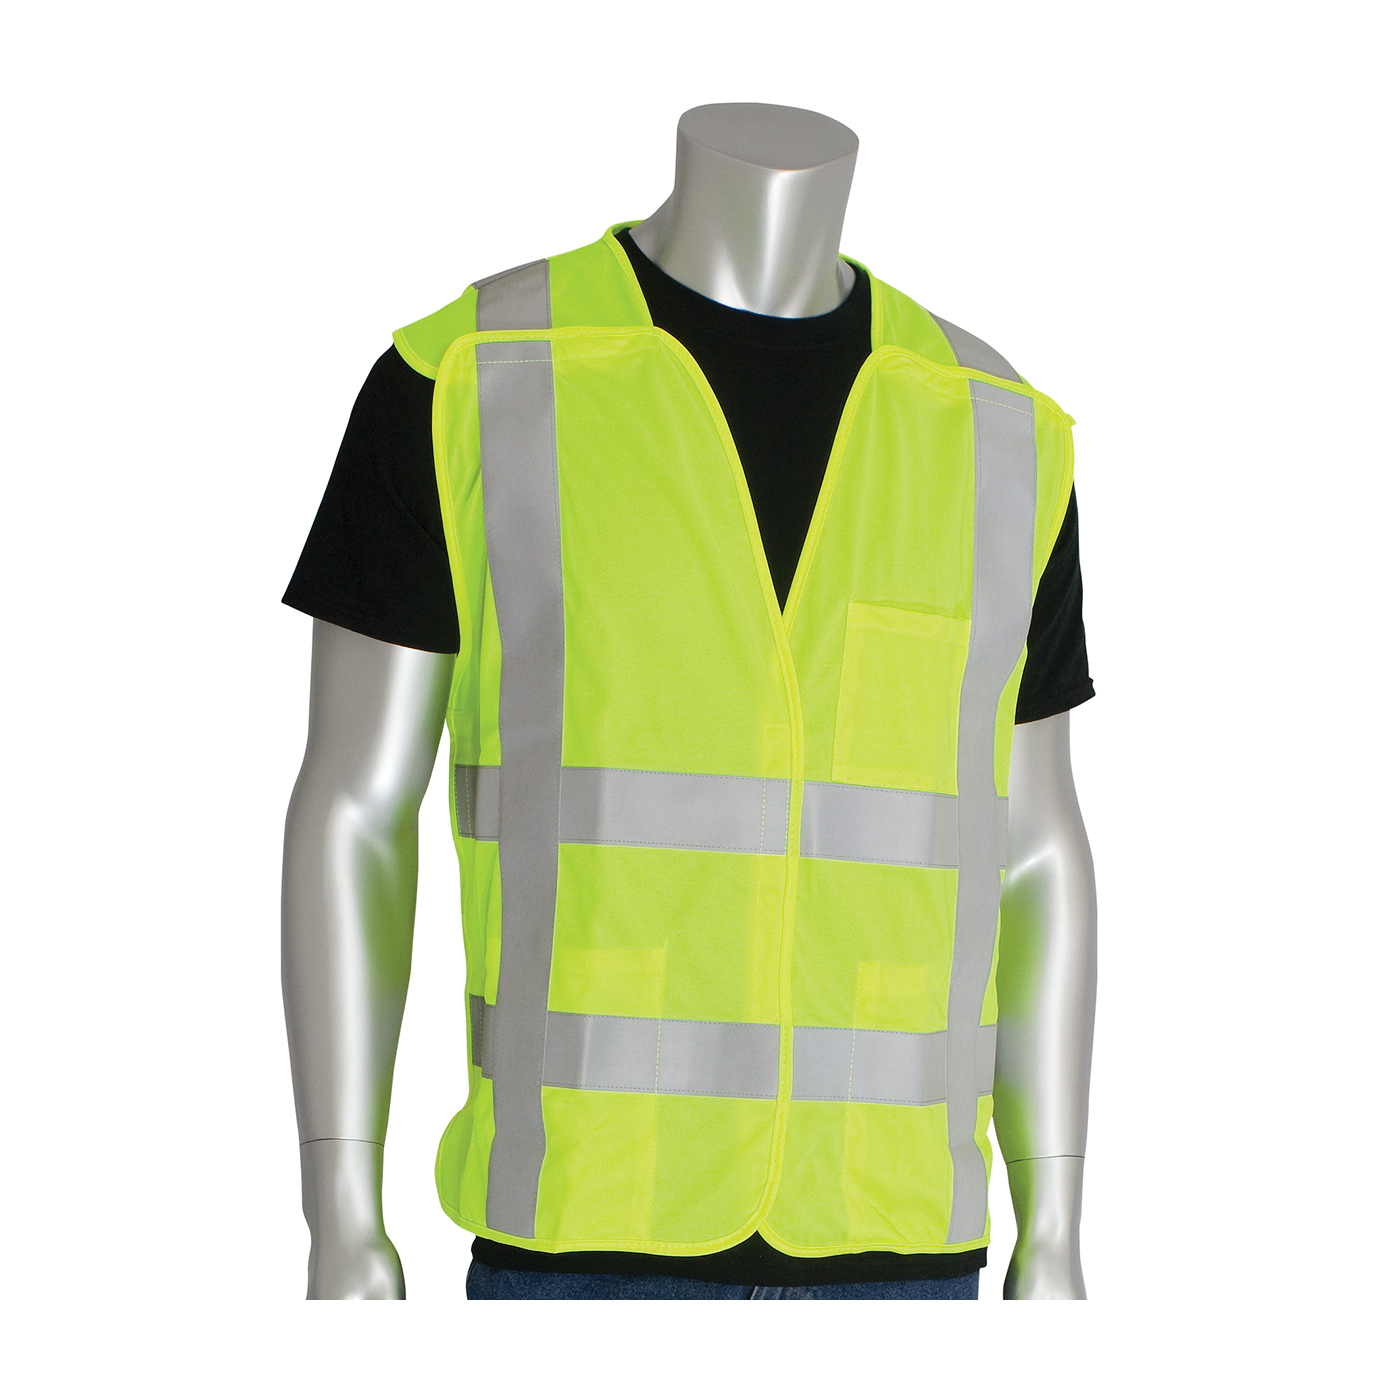 PIP® SafetyGear 305-5PVFRLY-S/M FR Treated Solid Vest, S to M, Hi-Viz Yellow, Polyester, Hook and Loop Closure, ANSI Class: Class 2, ANSI/ISEA 107